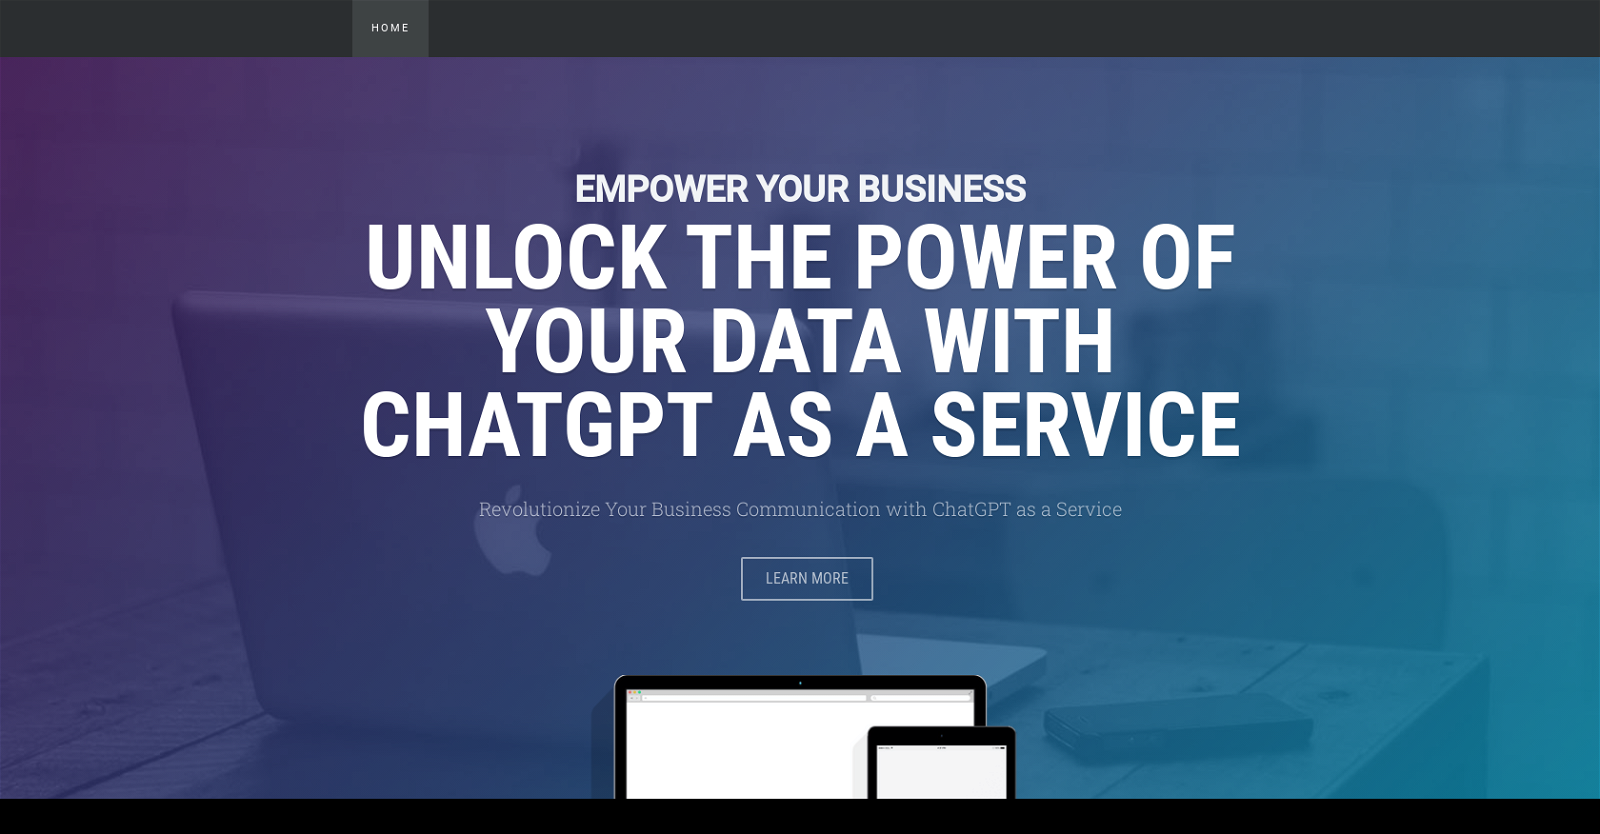 ChatGPT as a Service